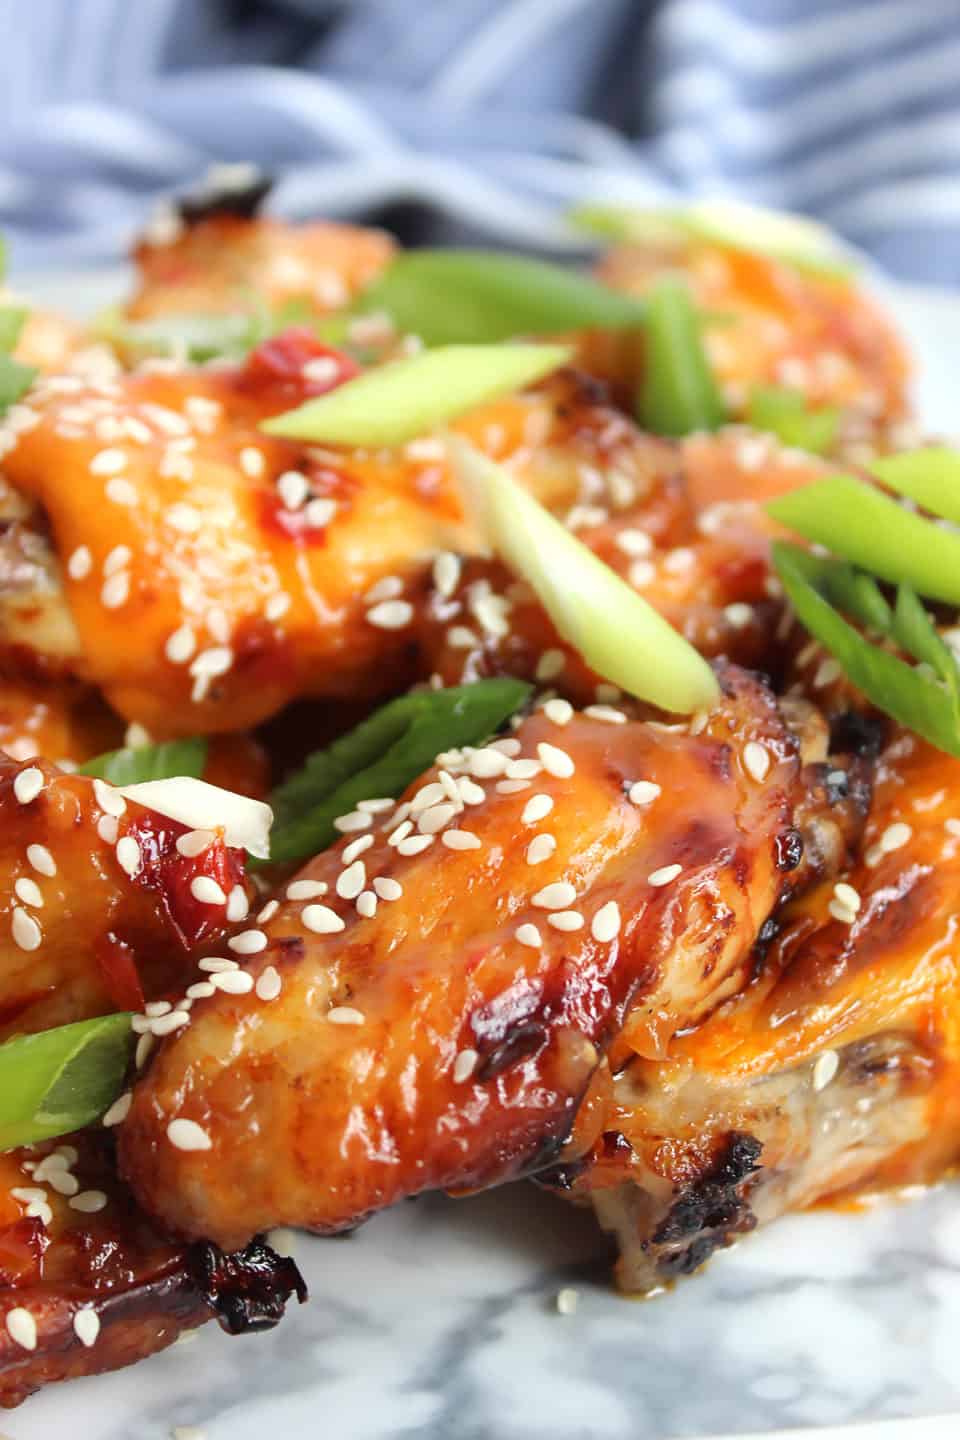 Chili and pineapple wings piled on top of each other